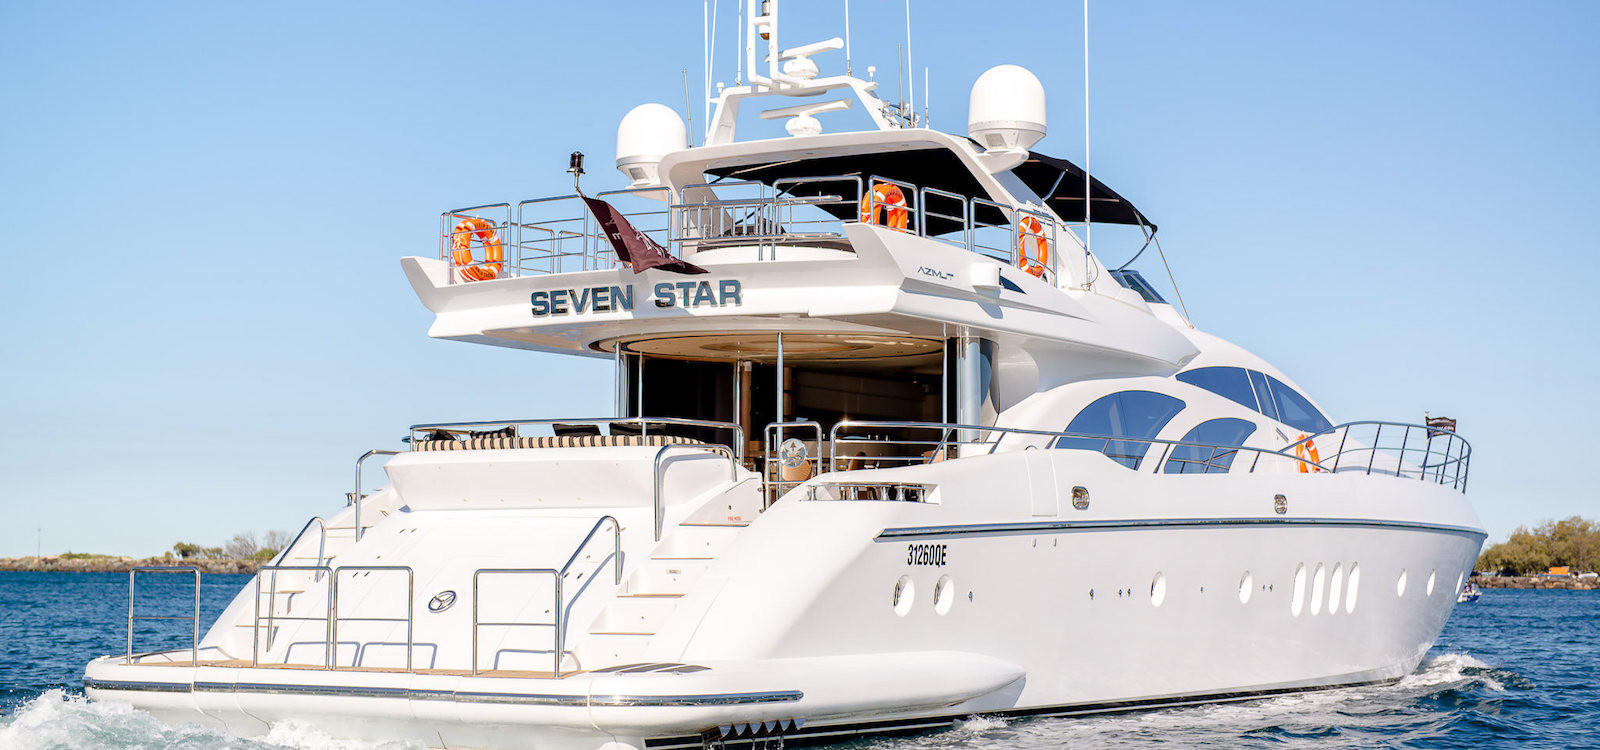 superyacht hire on Seven Star stern view 